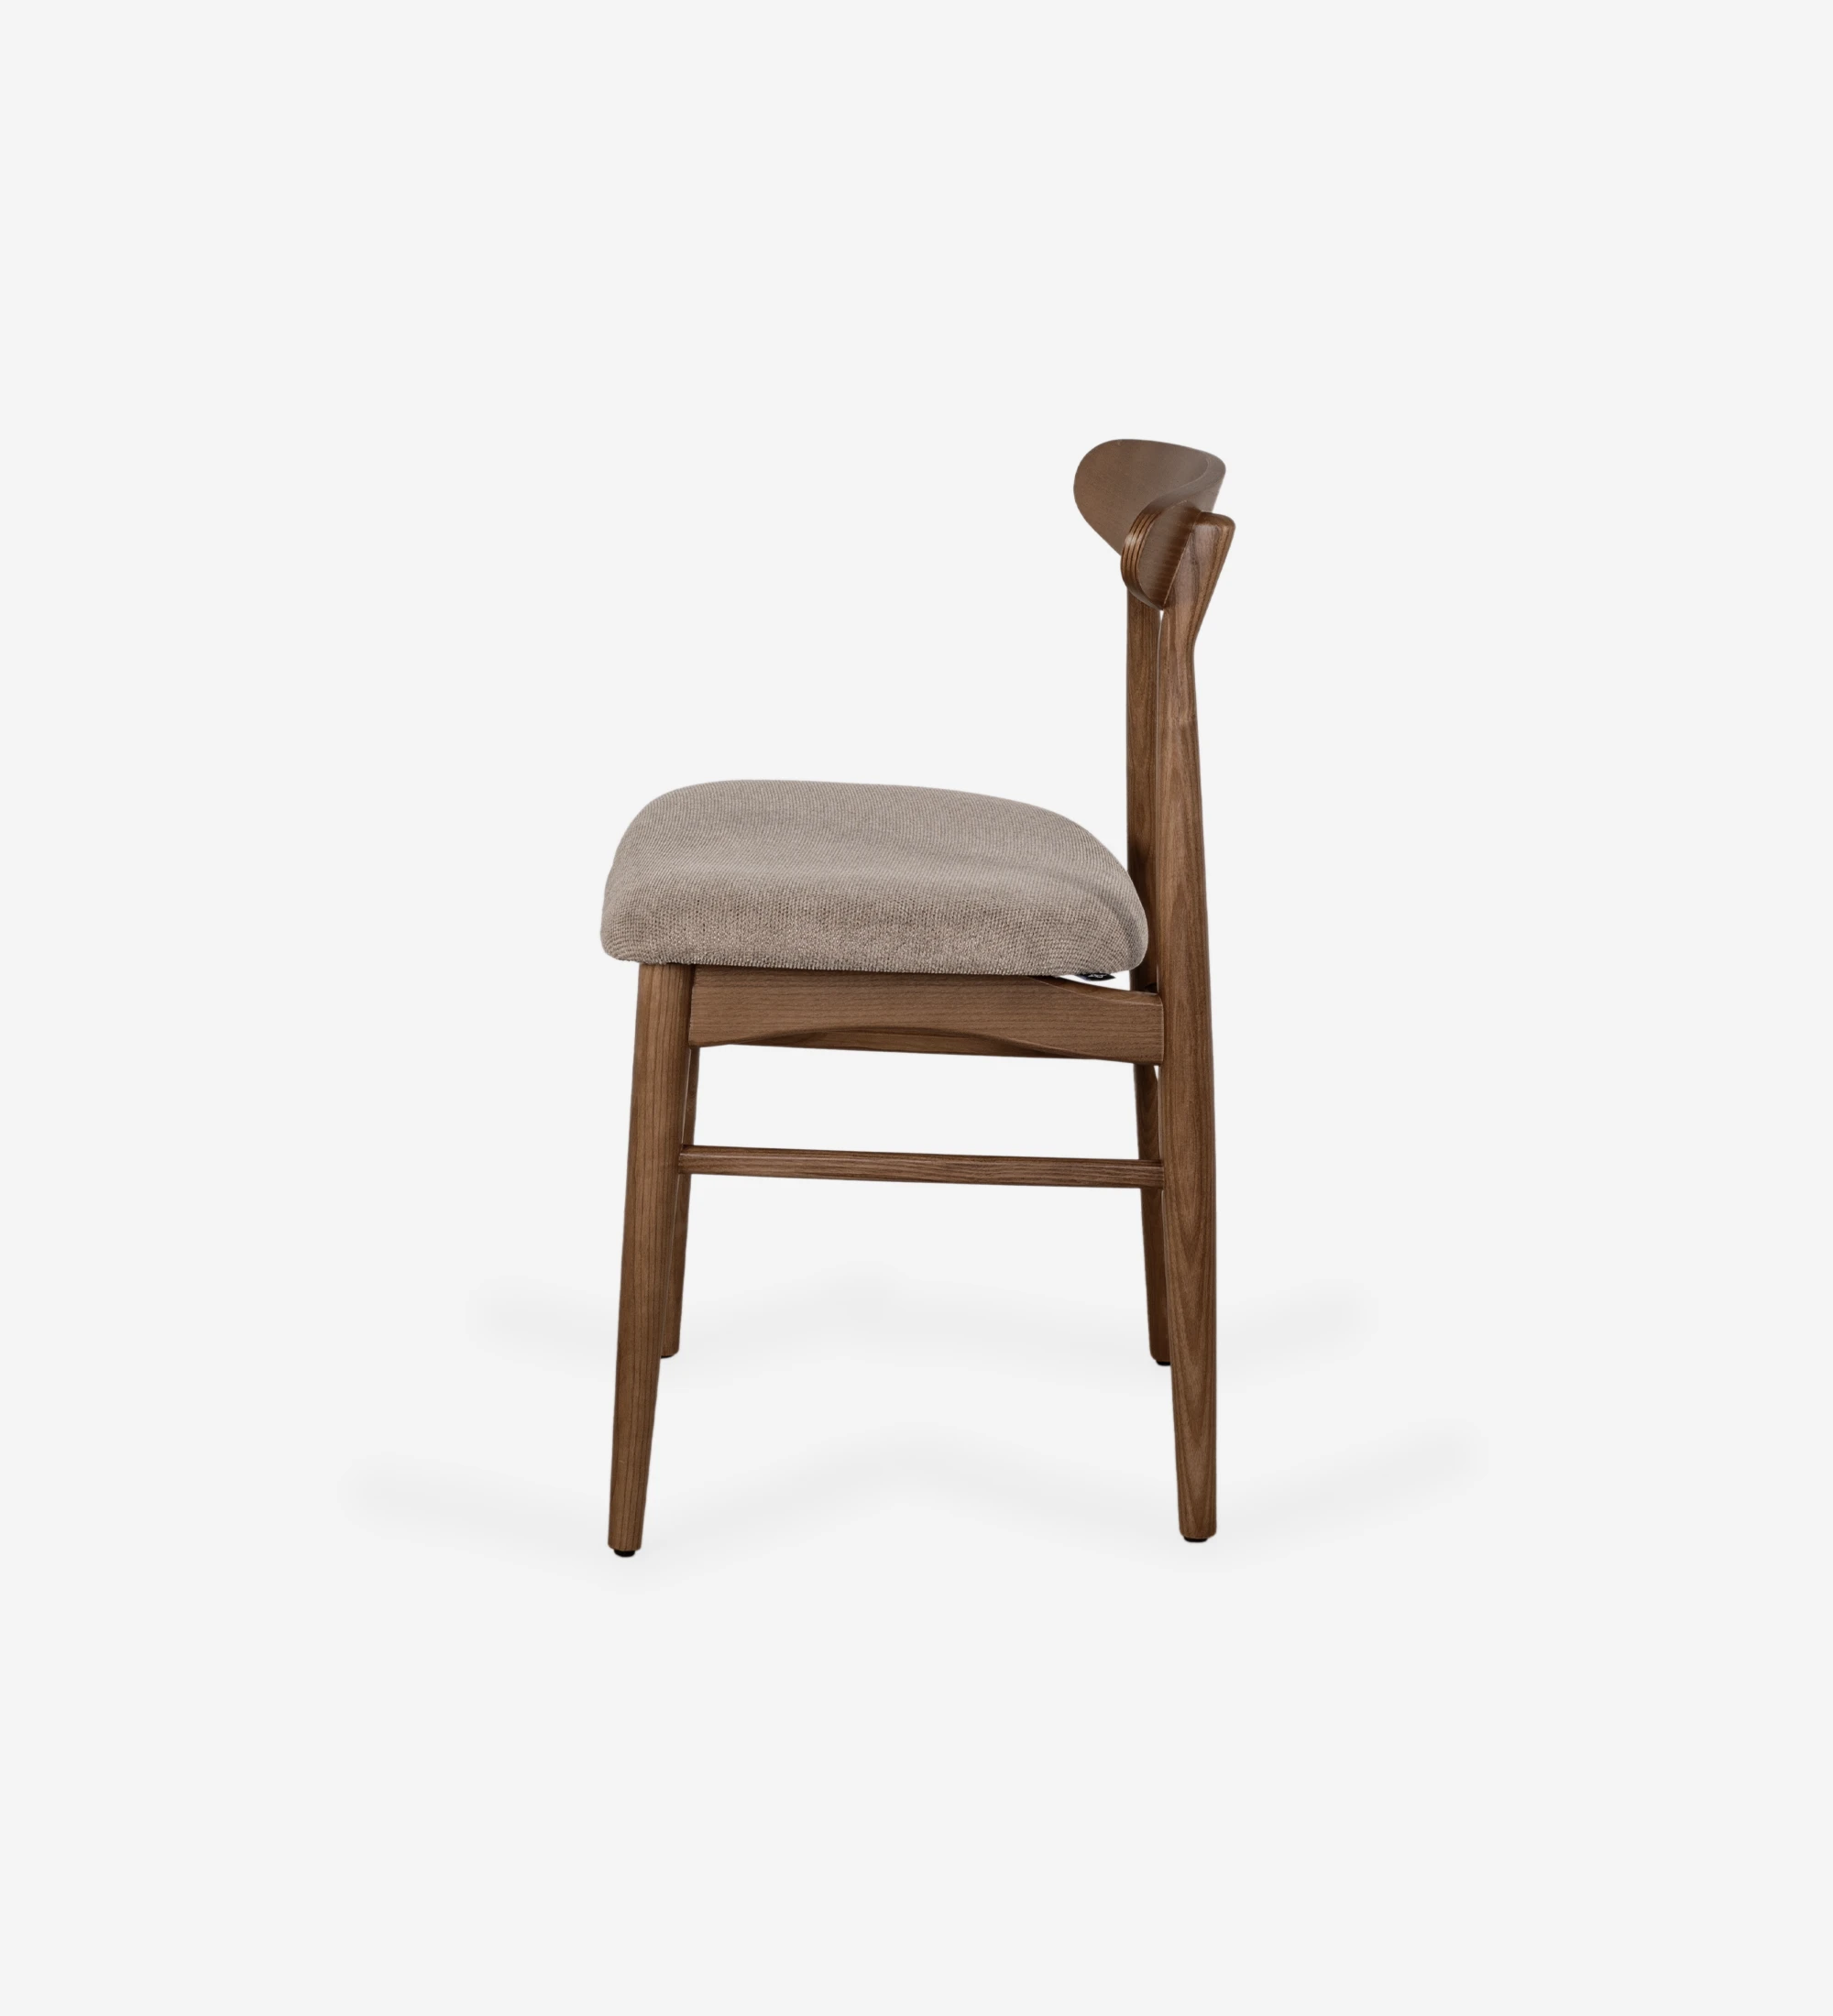 Chair with walnut wood structure and fabric upholstered seat.